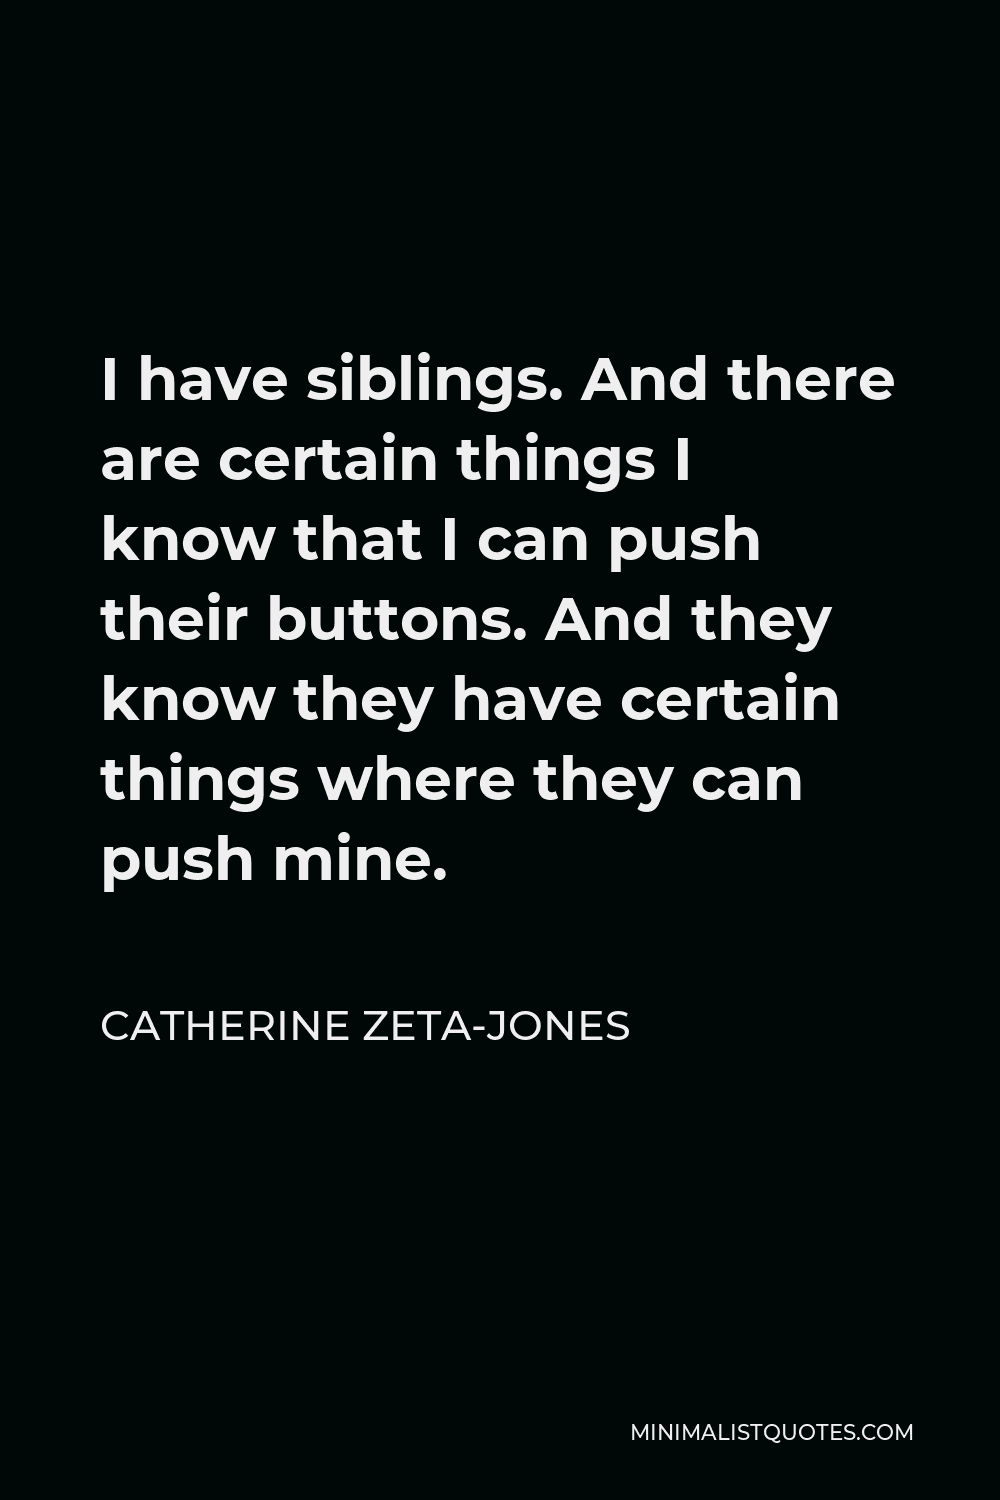 Catherine Zeta-Jones Quote - I have siblings. And there are certain things I know that I can push their buttons. And they know they have certain things where they can push mine.